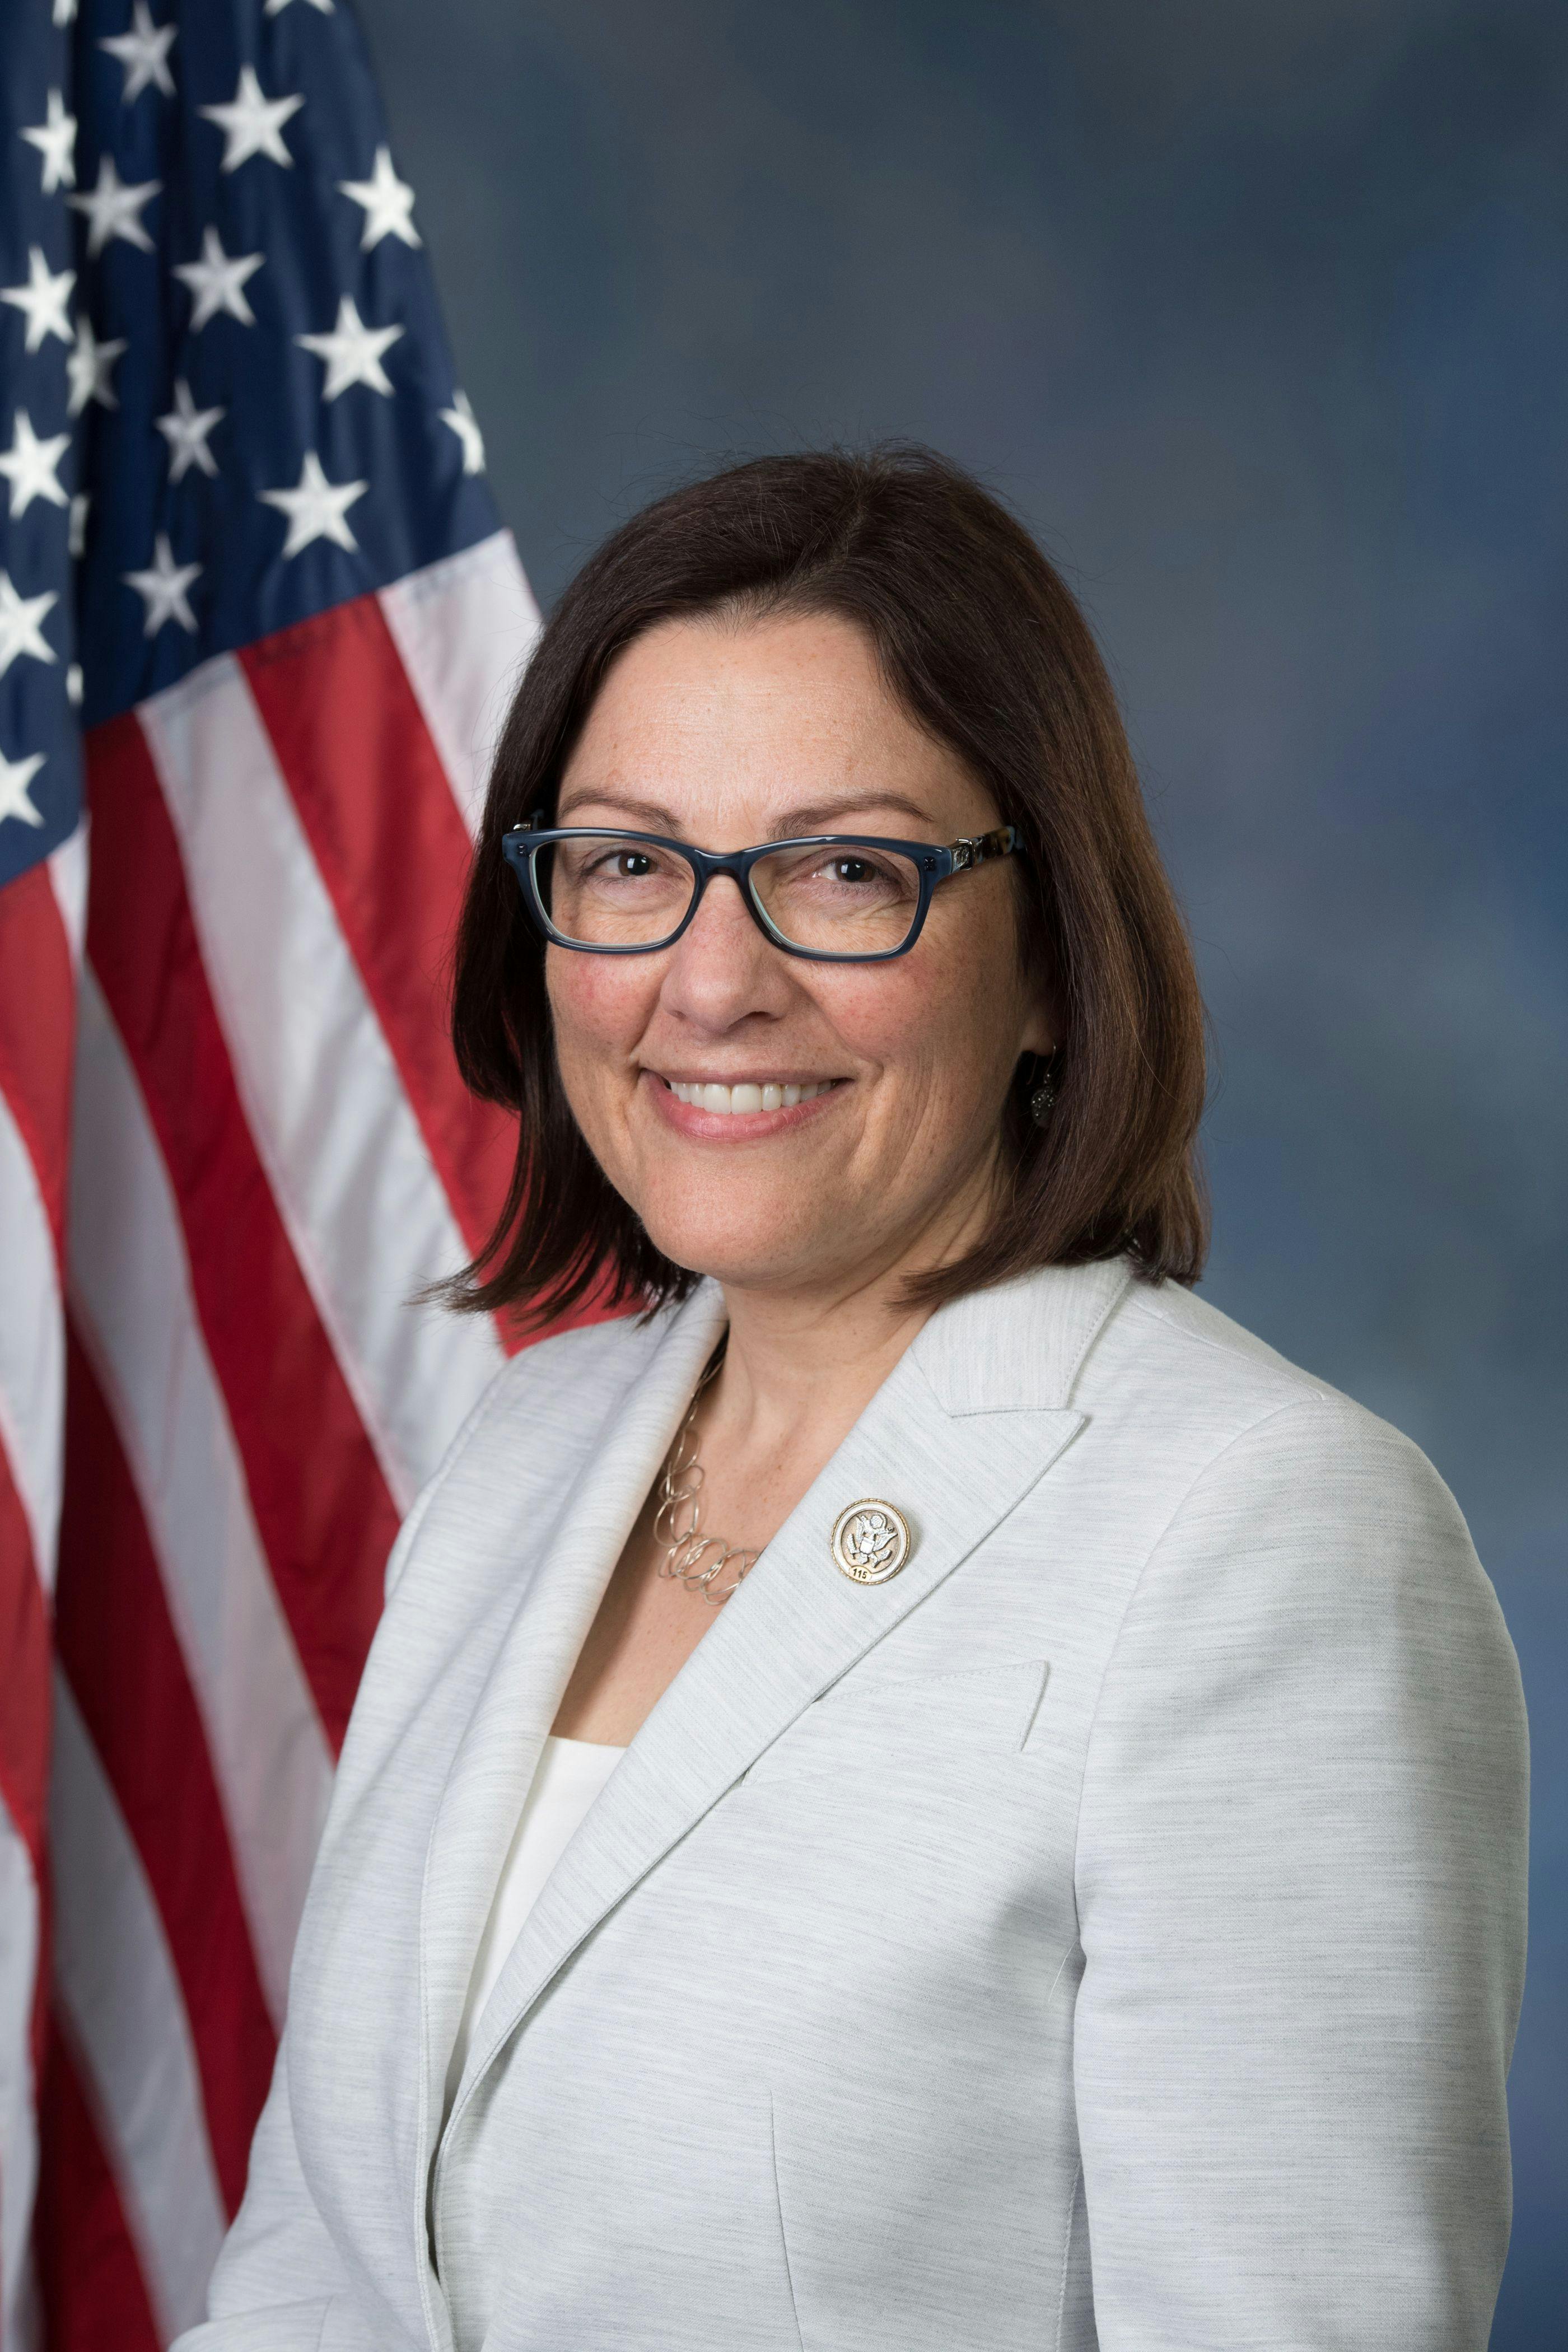 U.S. Rep. Suzan DelBene, D-Wash., has sponsored a bill to revamp prior authorization in Medicare Advantage plans. The House passed the bill, and it's now in the Senate.